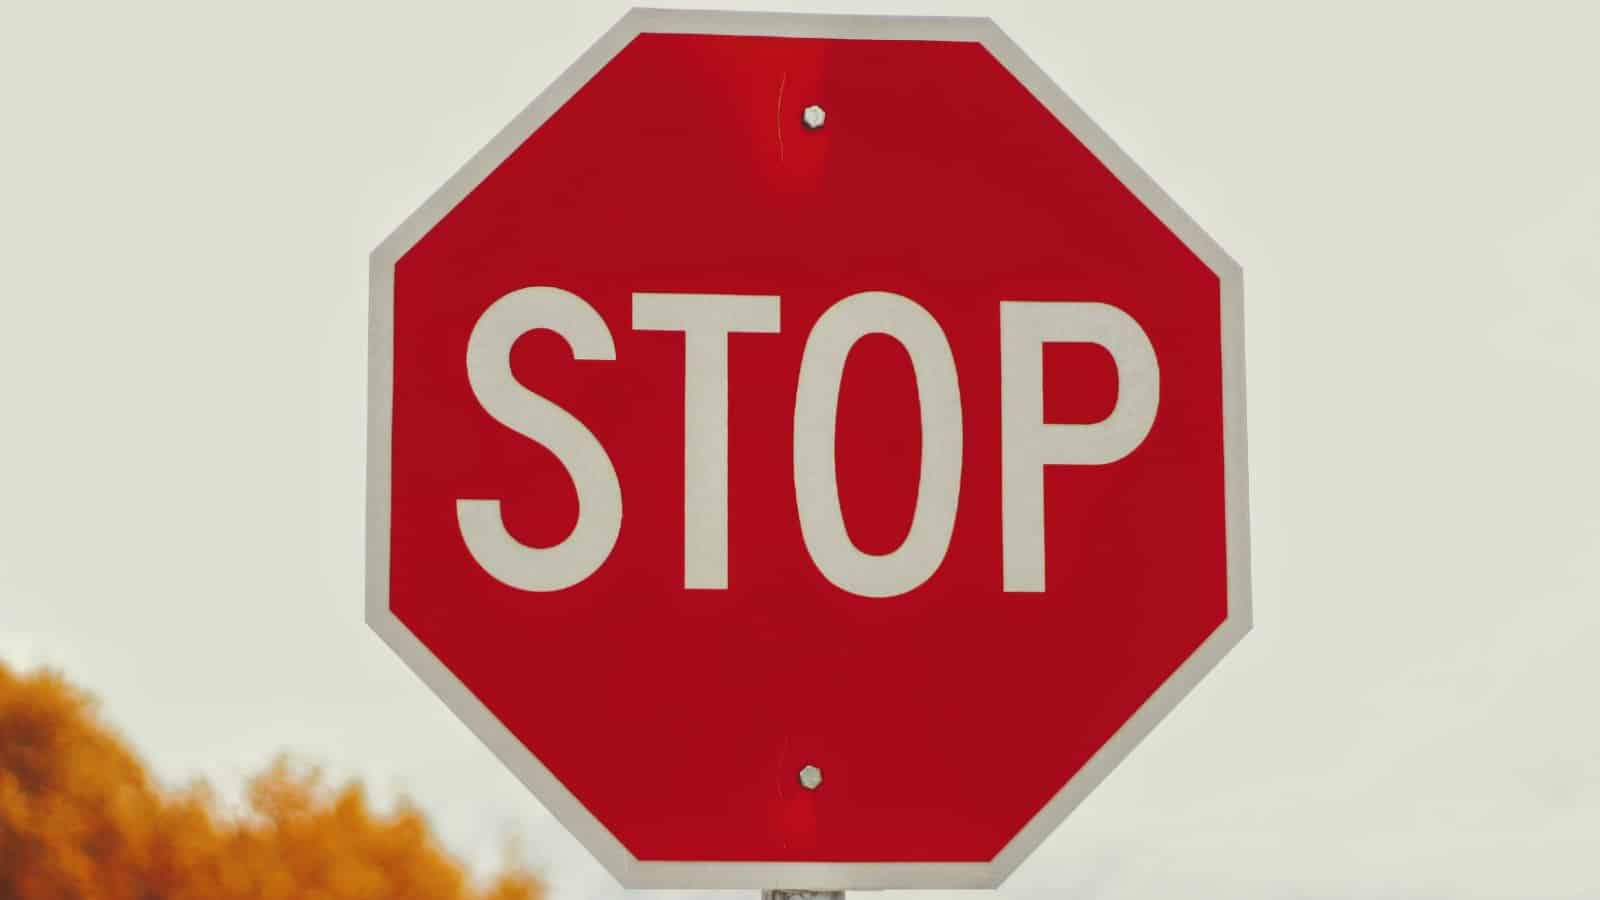 A stop sign